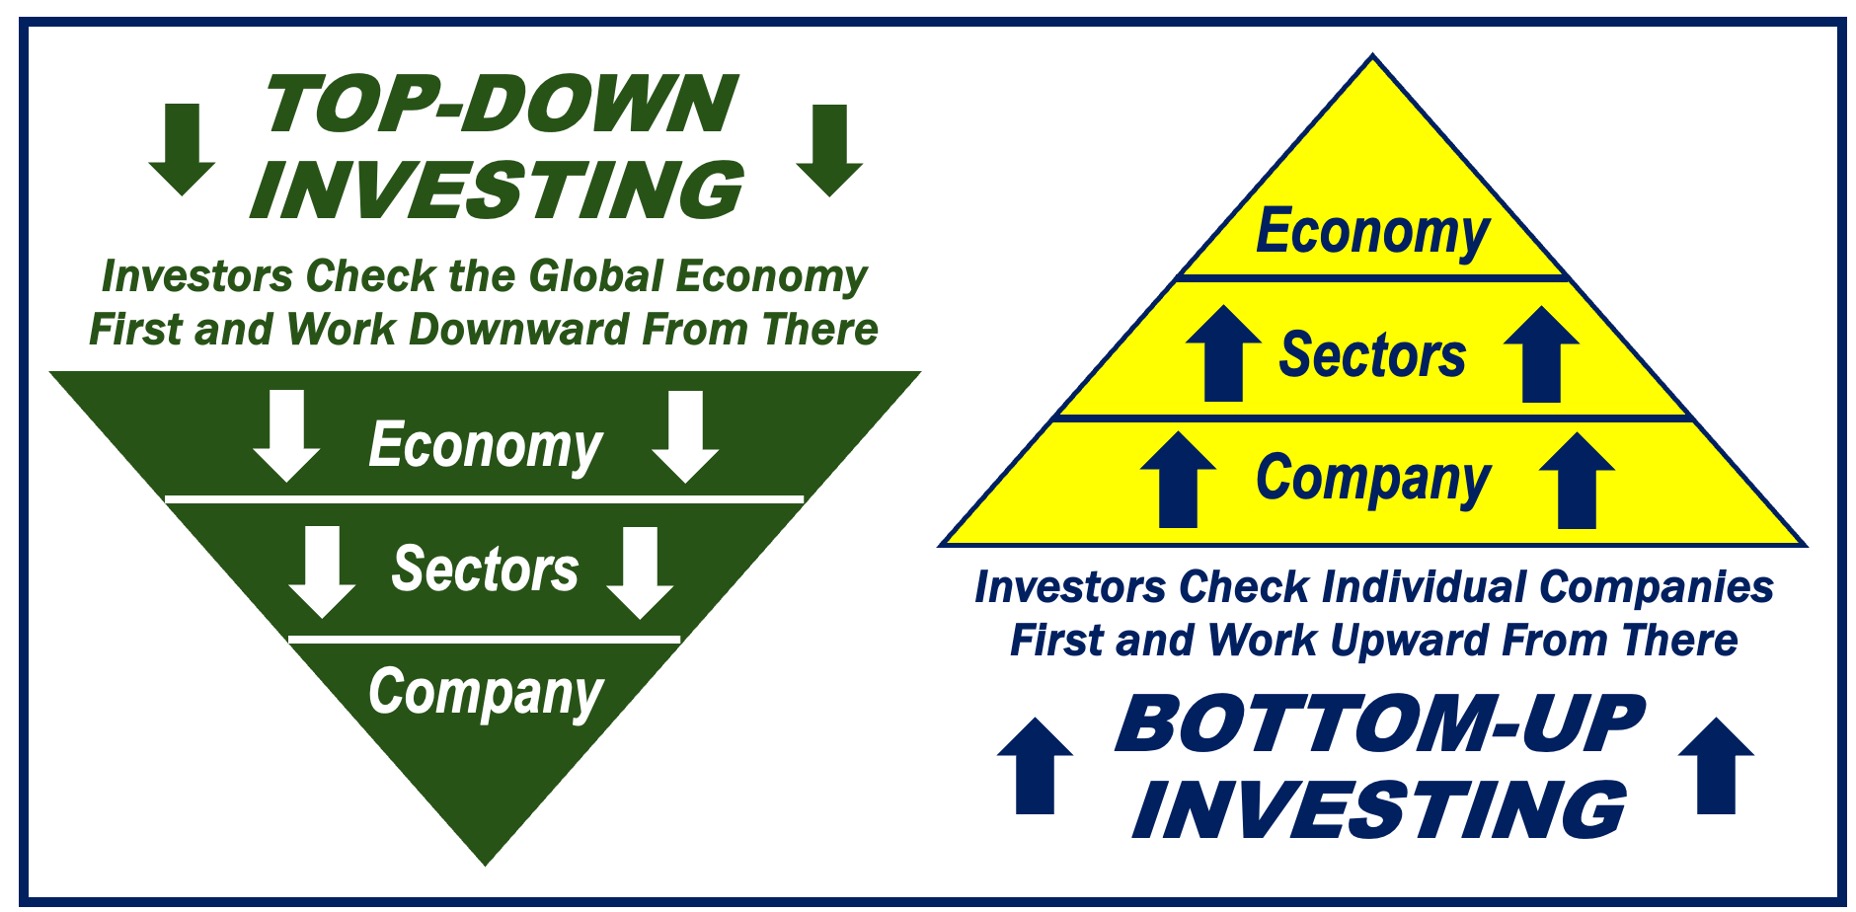 A green pyramid depicting top-down investing and a yellow:blue on depicting bottom-up investing